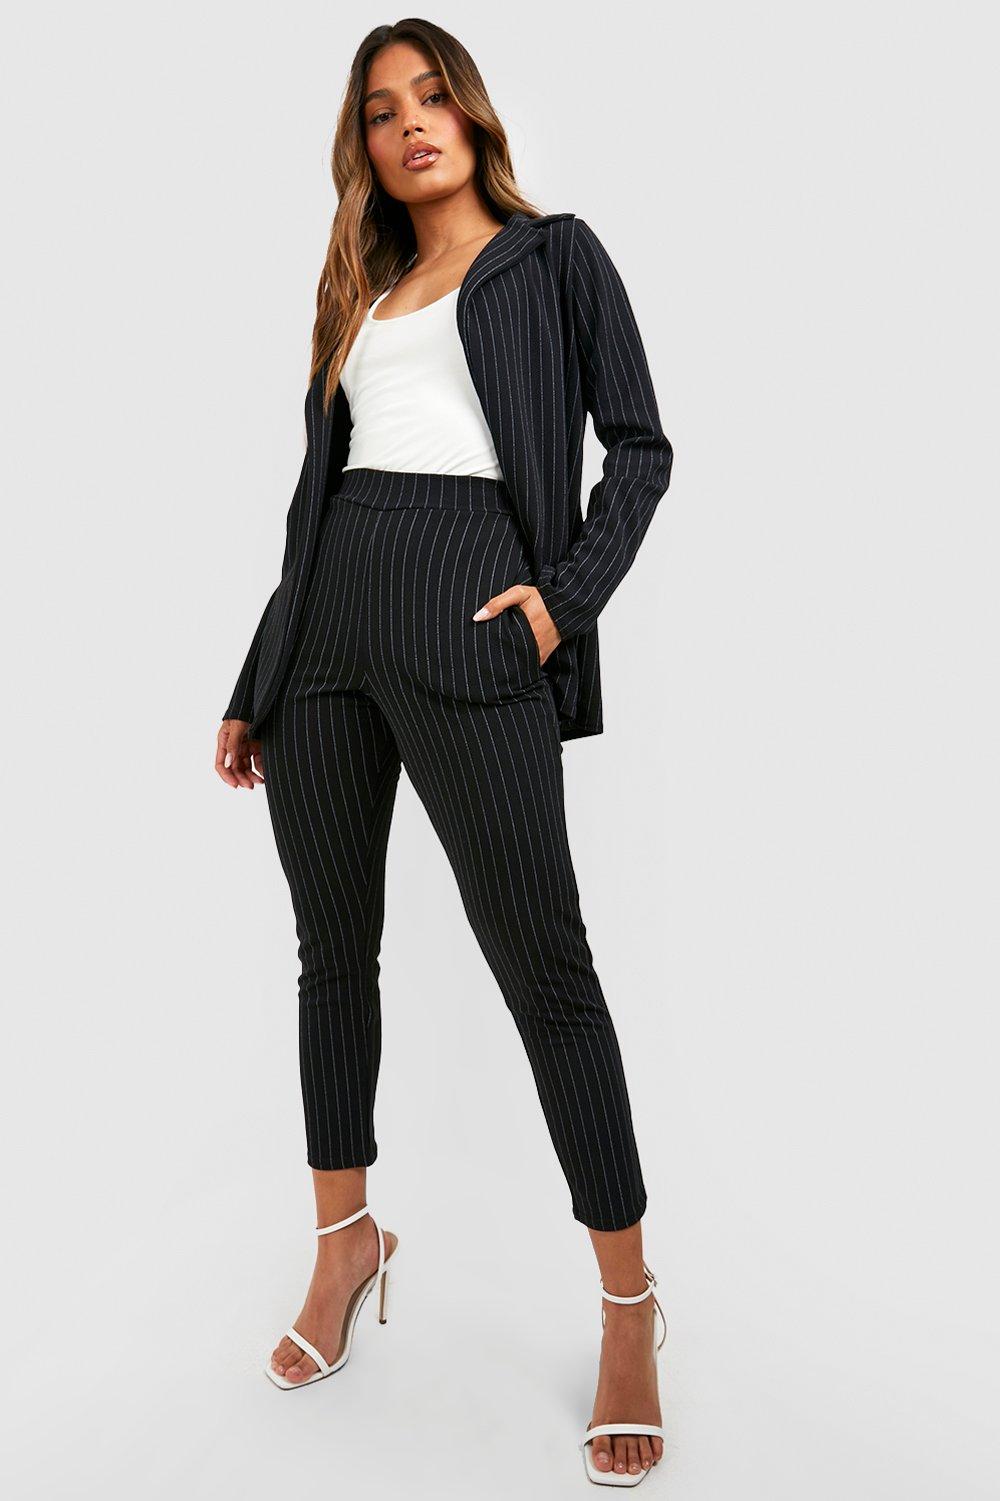 boohoo Women's Pinstripe Tailored Blazer And Trouser Co-Ord Suit|Size: 14|black